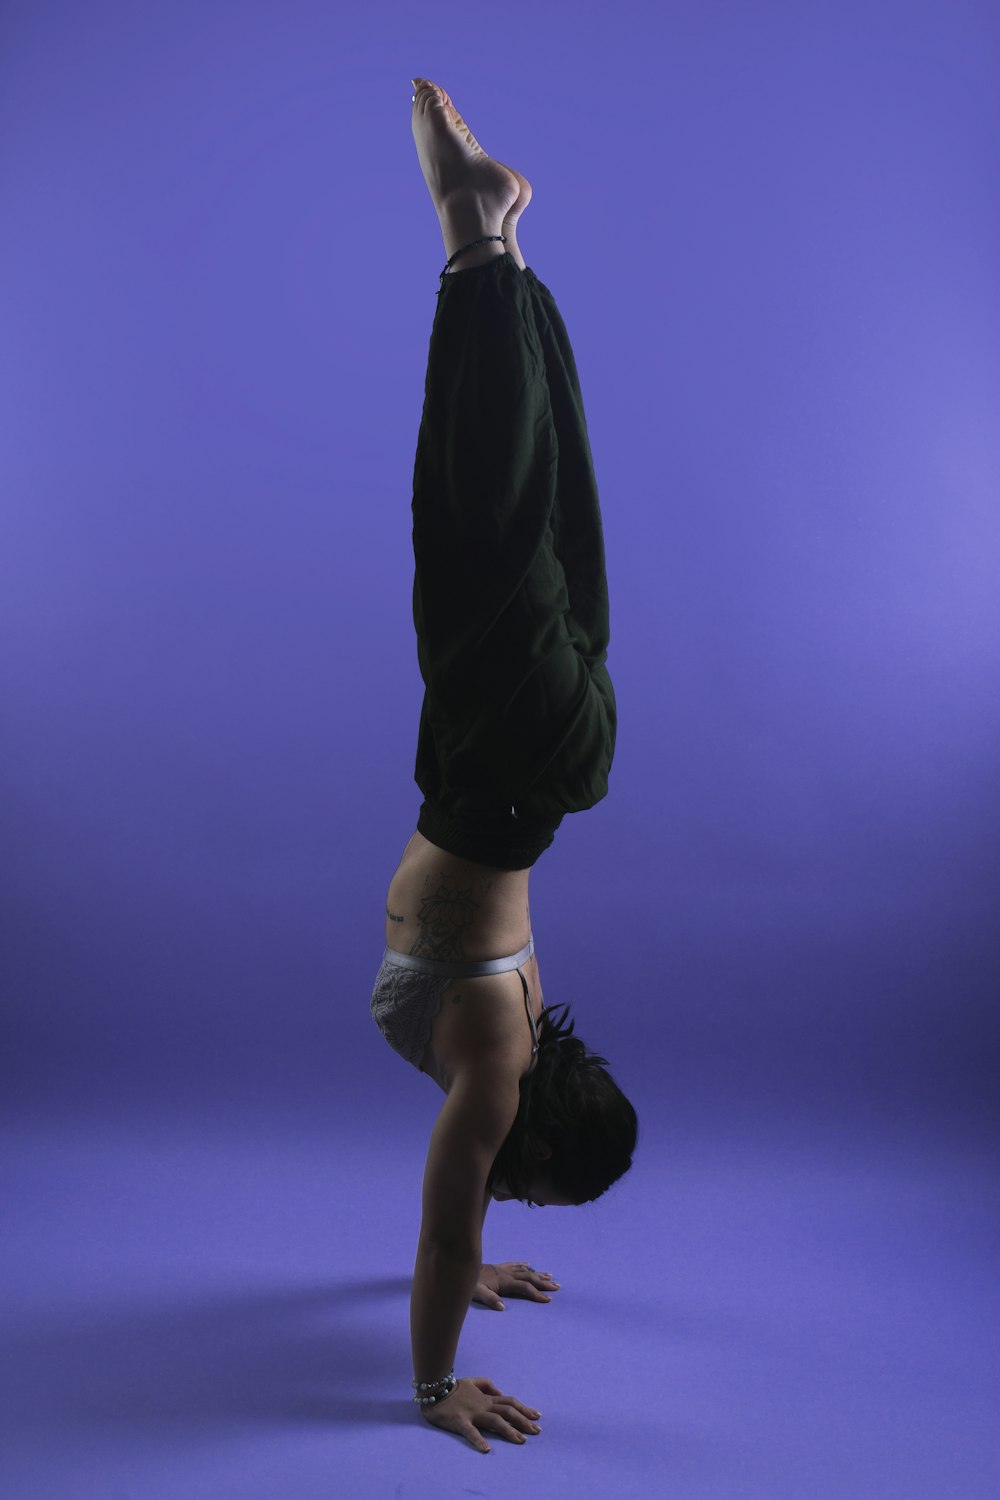 a person doing a handstand on a purple background